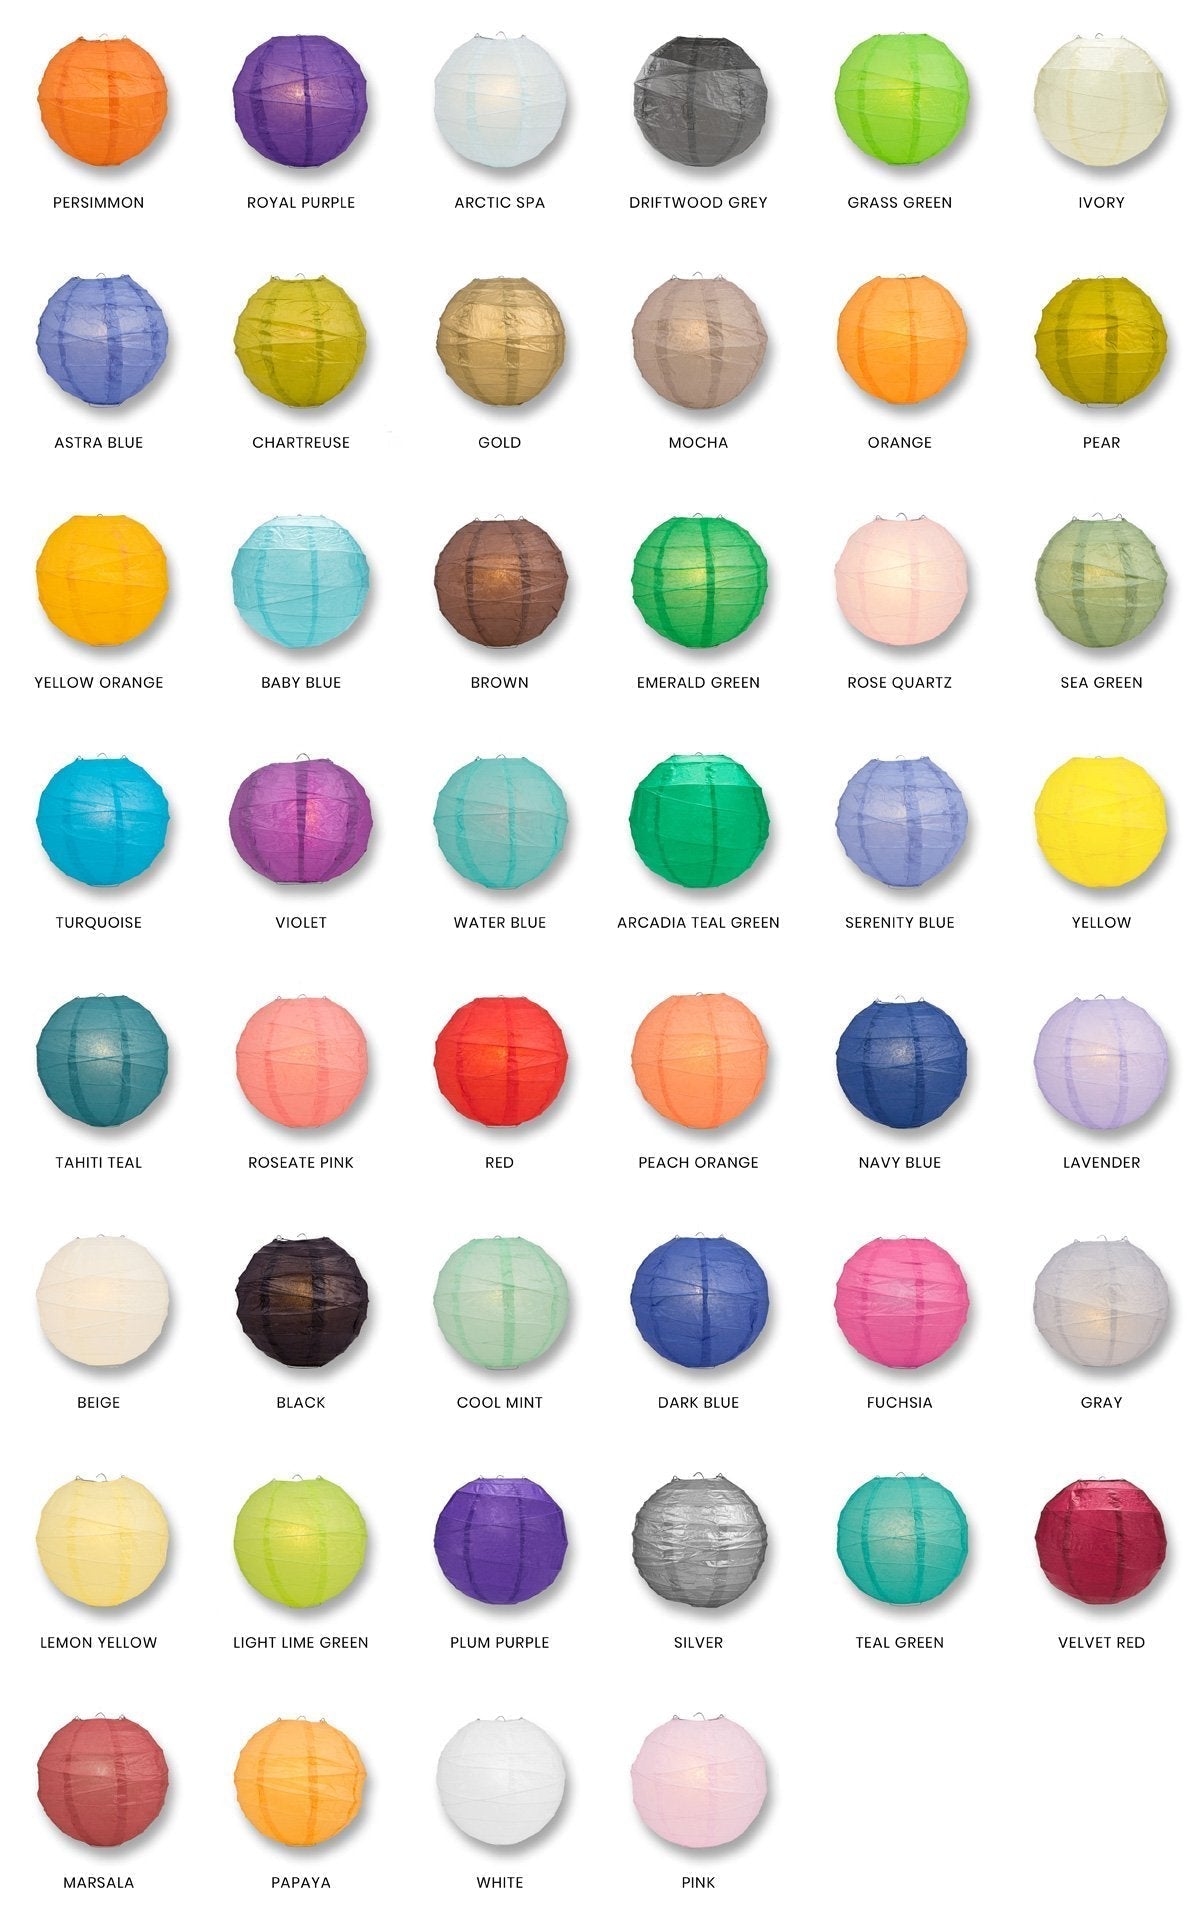 30" to 36" Crisscross Ribbing Paper Lanterns (30-Pack) - Custom Colors Available for Pre-Order (90-Day Processing)